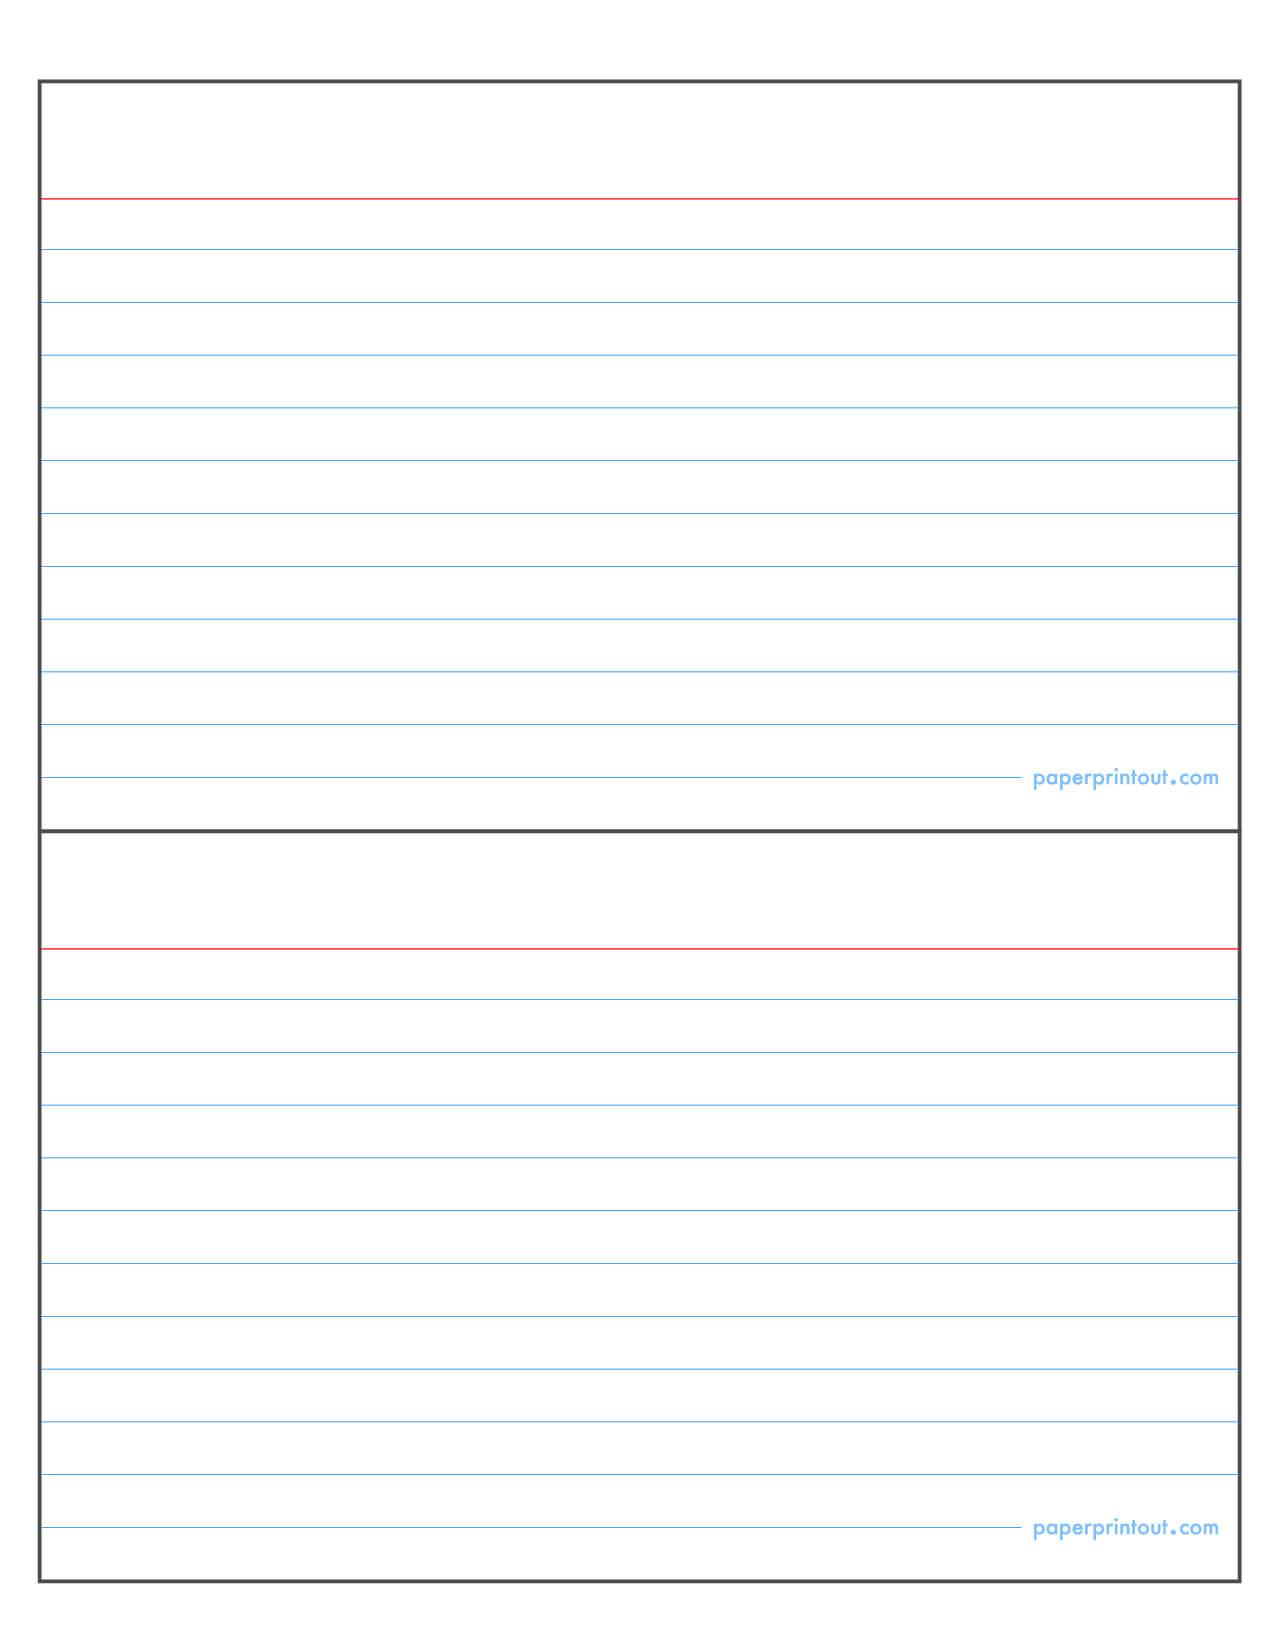 3X5 Card Template Microsoft Word – Colona.rsd7 Pertaining To 3 X 5 Index Card Template